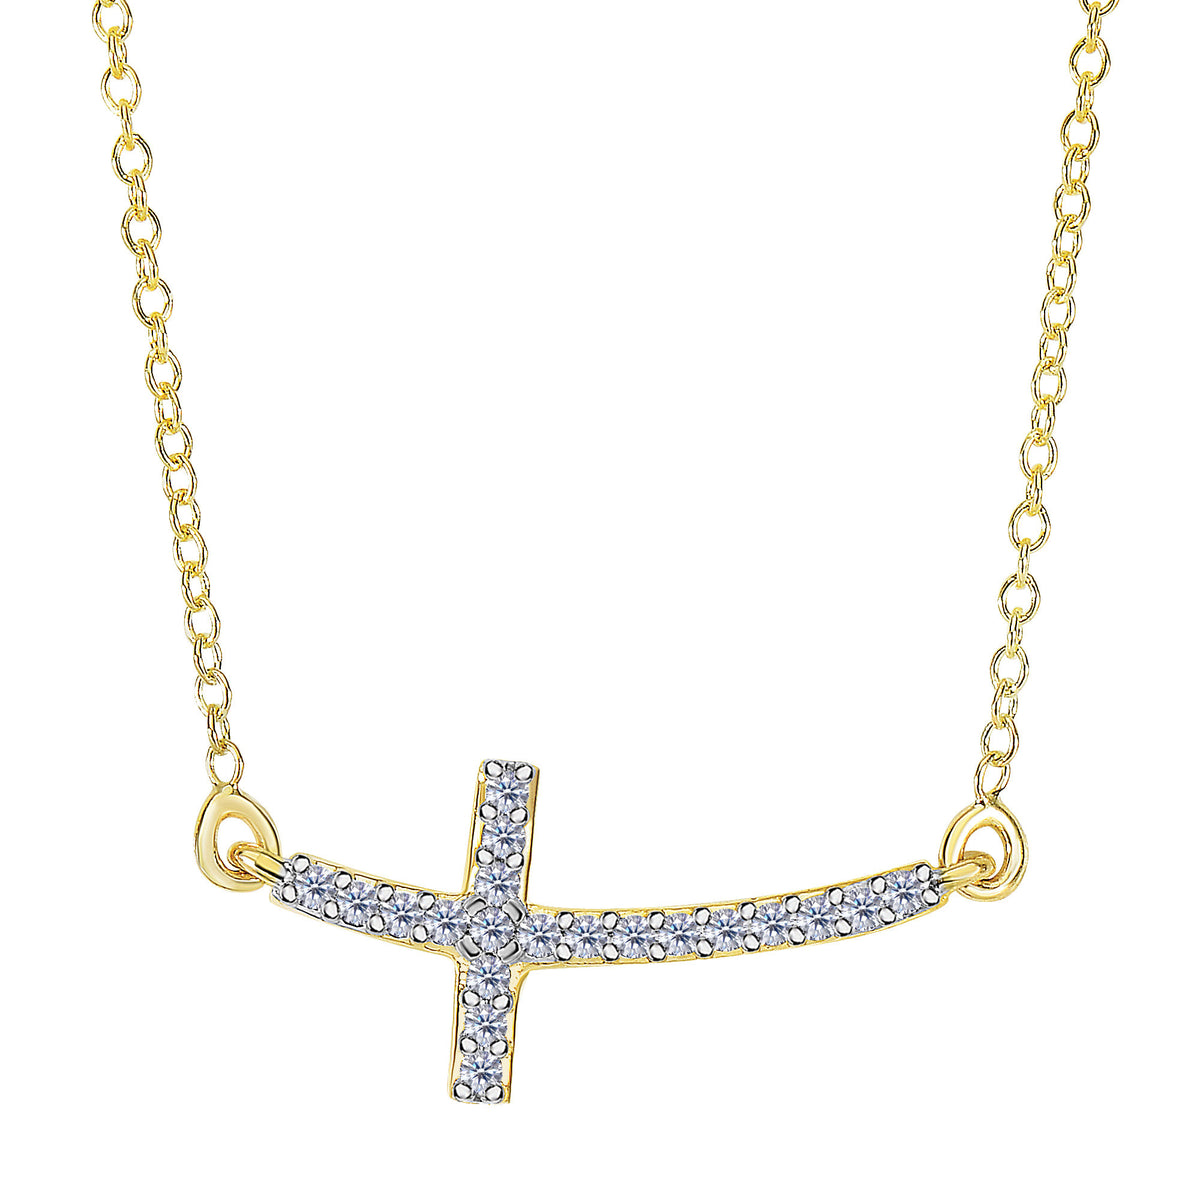 14k Yellow Gold With 0.12ct Diamonds Curved Side Ways Cross Necklace - 18 Inches - JewelryAffairs
 - 1